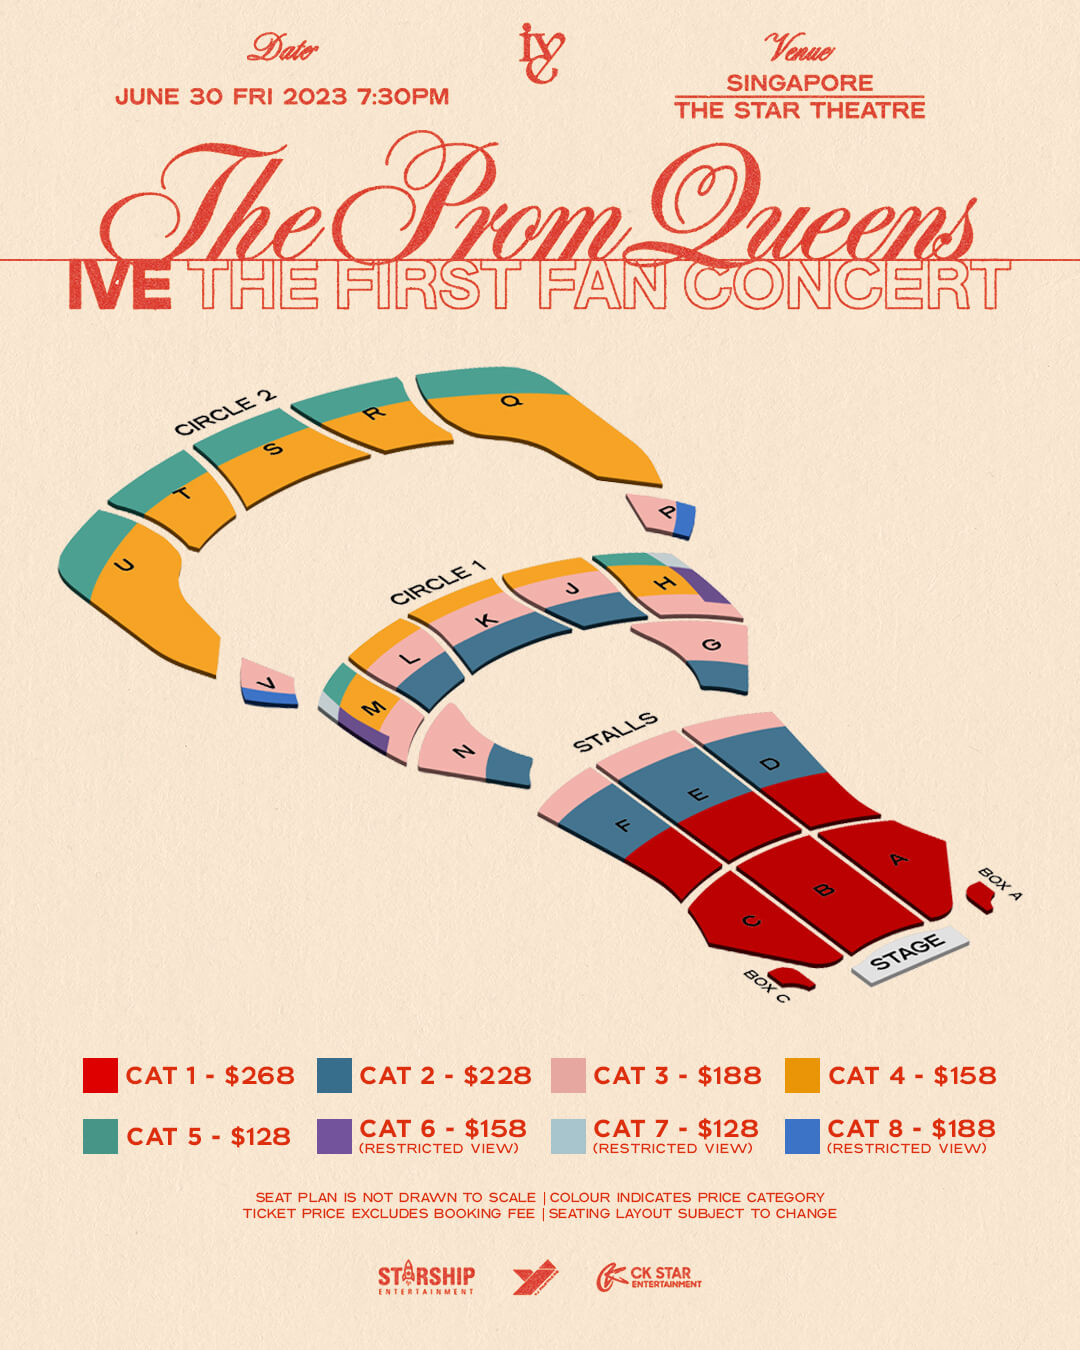 IVE THE FIRST FAN CONCERT <The Prom Queens> in Singapore